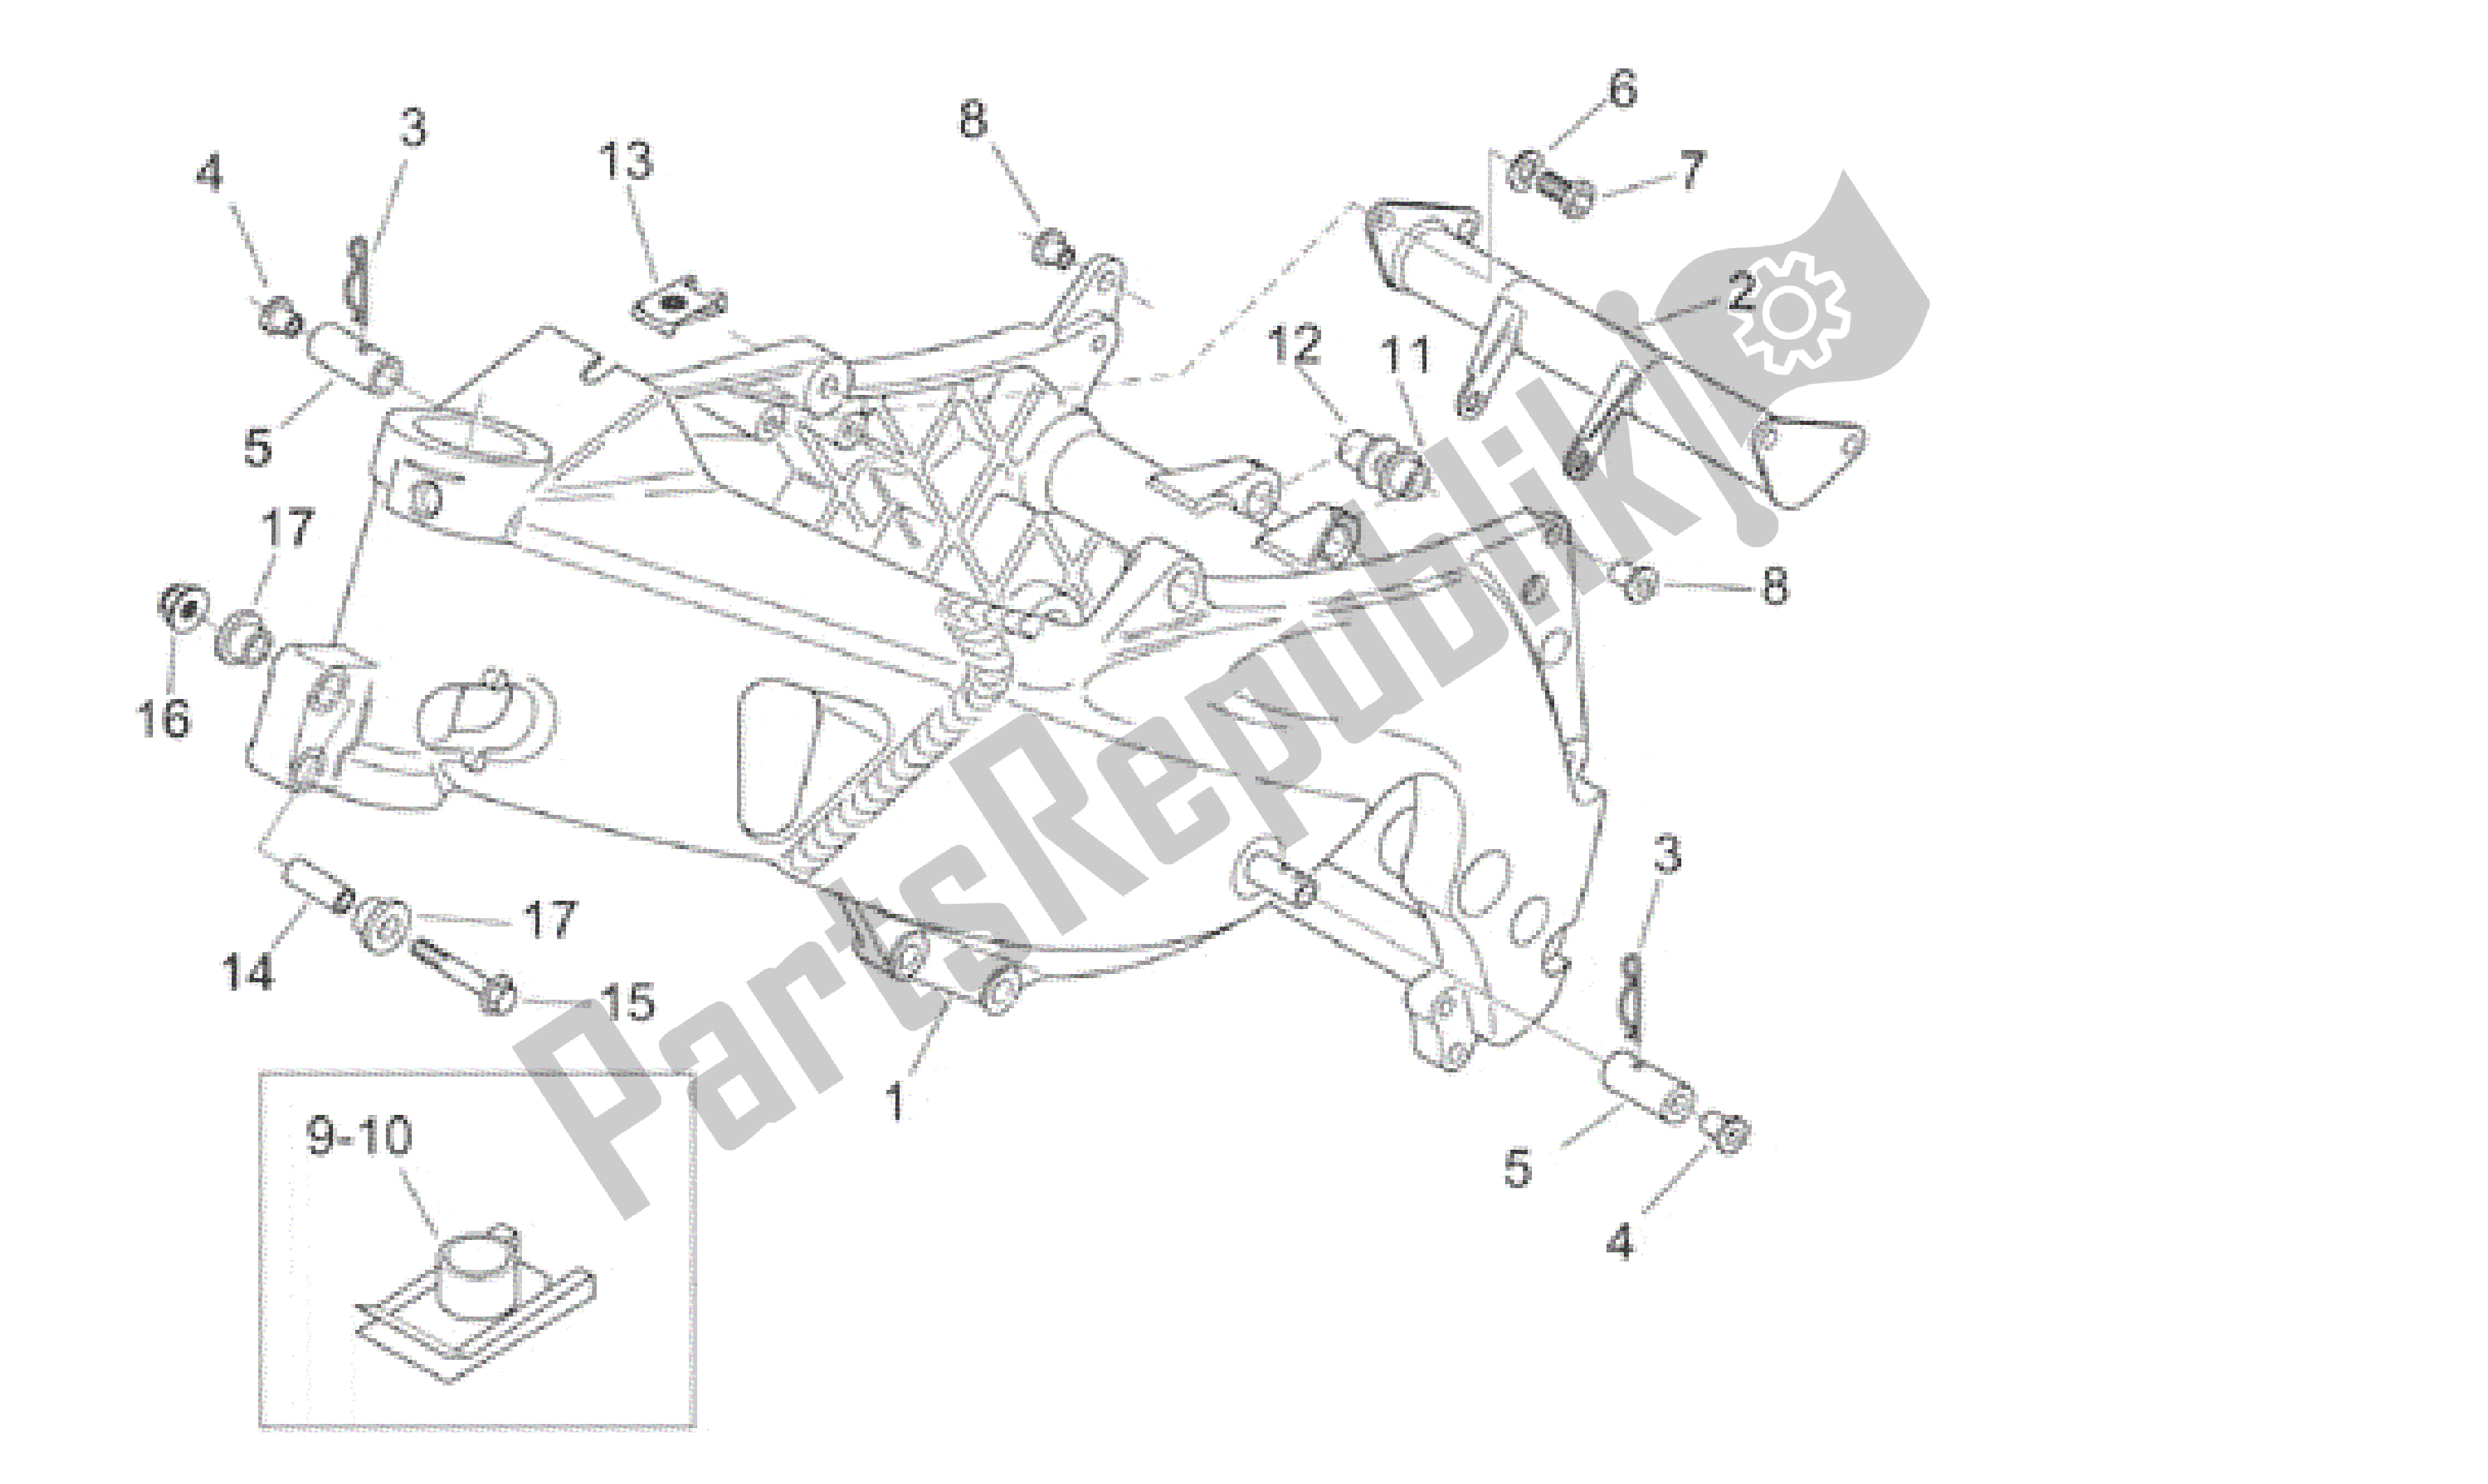 All parts for the Frame of the Aprilia RS 125 1999 - 2001